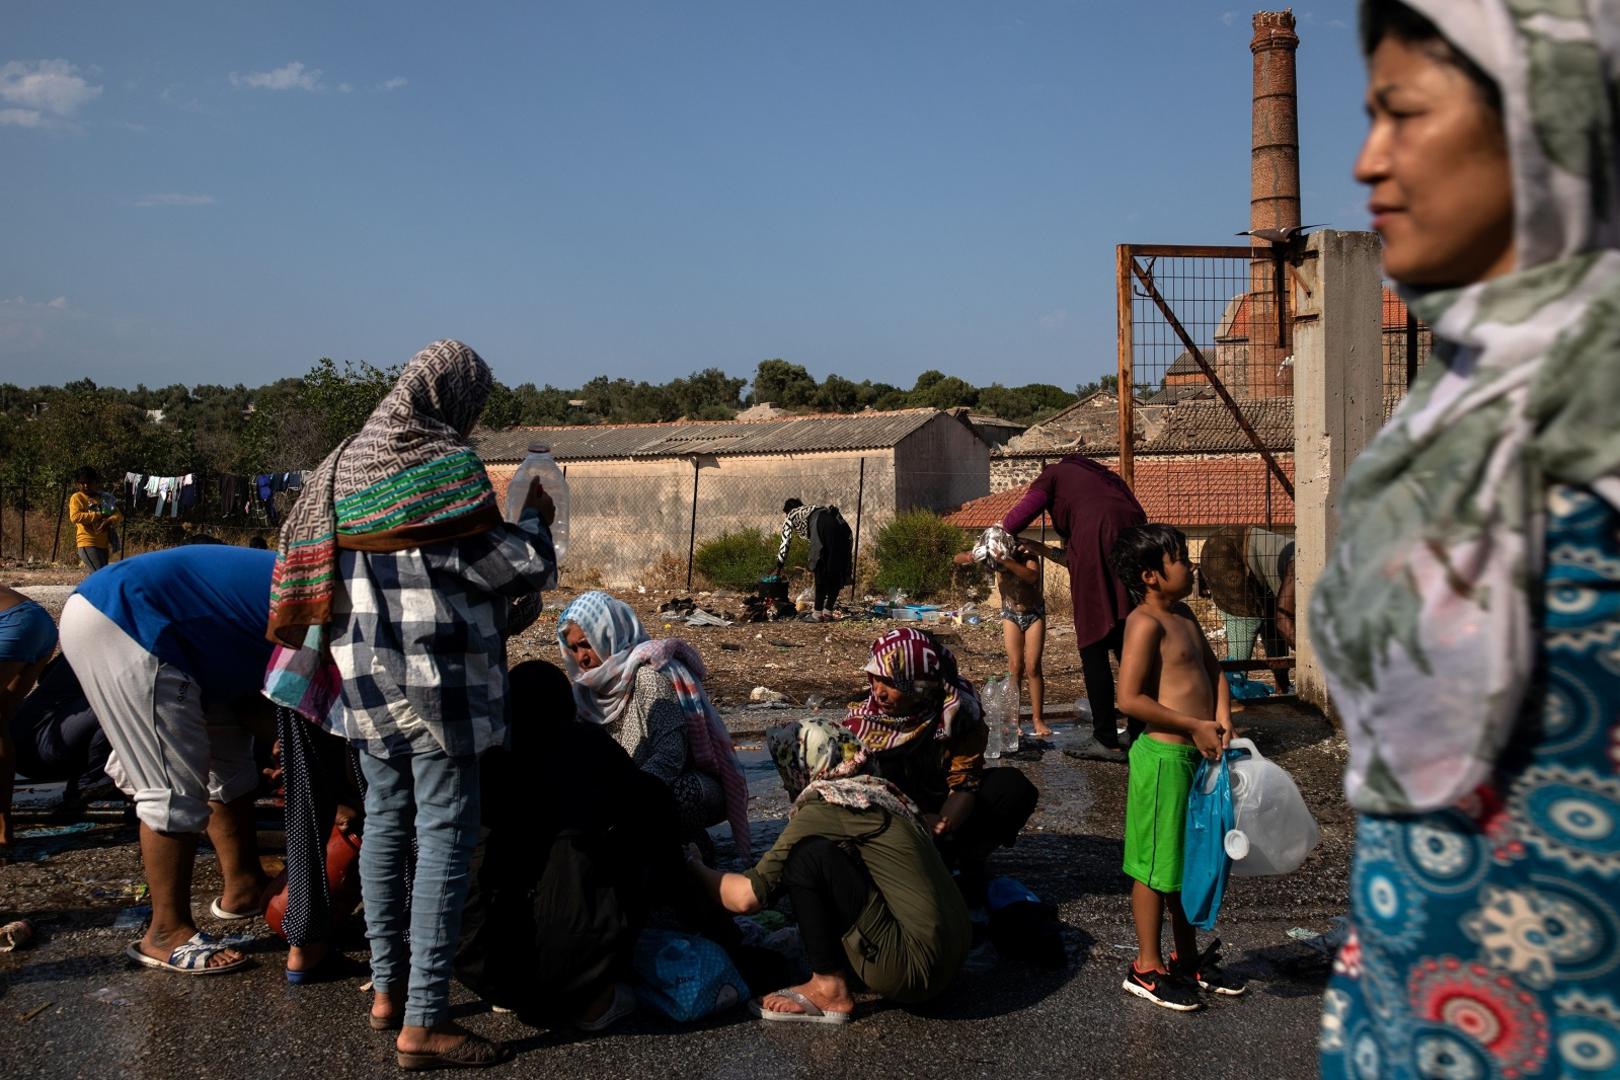 Refugees and migrants from the destroyed Moria camp wash and fill bottles with water, on the island of Lesbos Refugees and migrants from the destroyed Moria camp wash and fill bottles with water, on the island of Lesbos, Greece, September 12, 2020. REUTERS/Alkis Konstantinidis ALKIS KONSTANTINIDIS